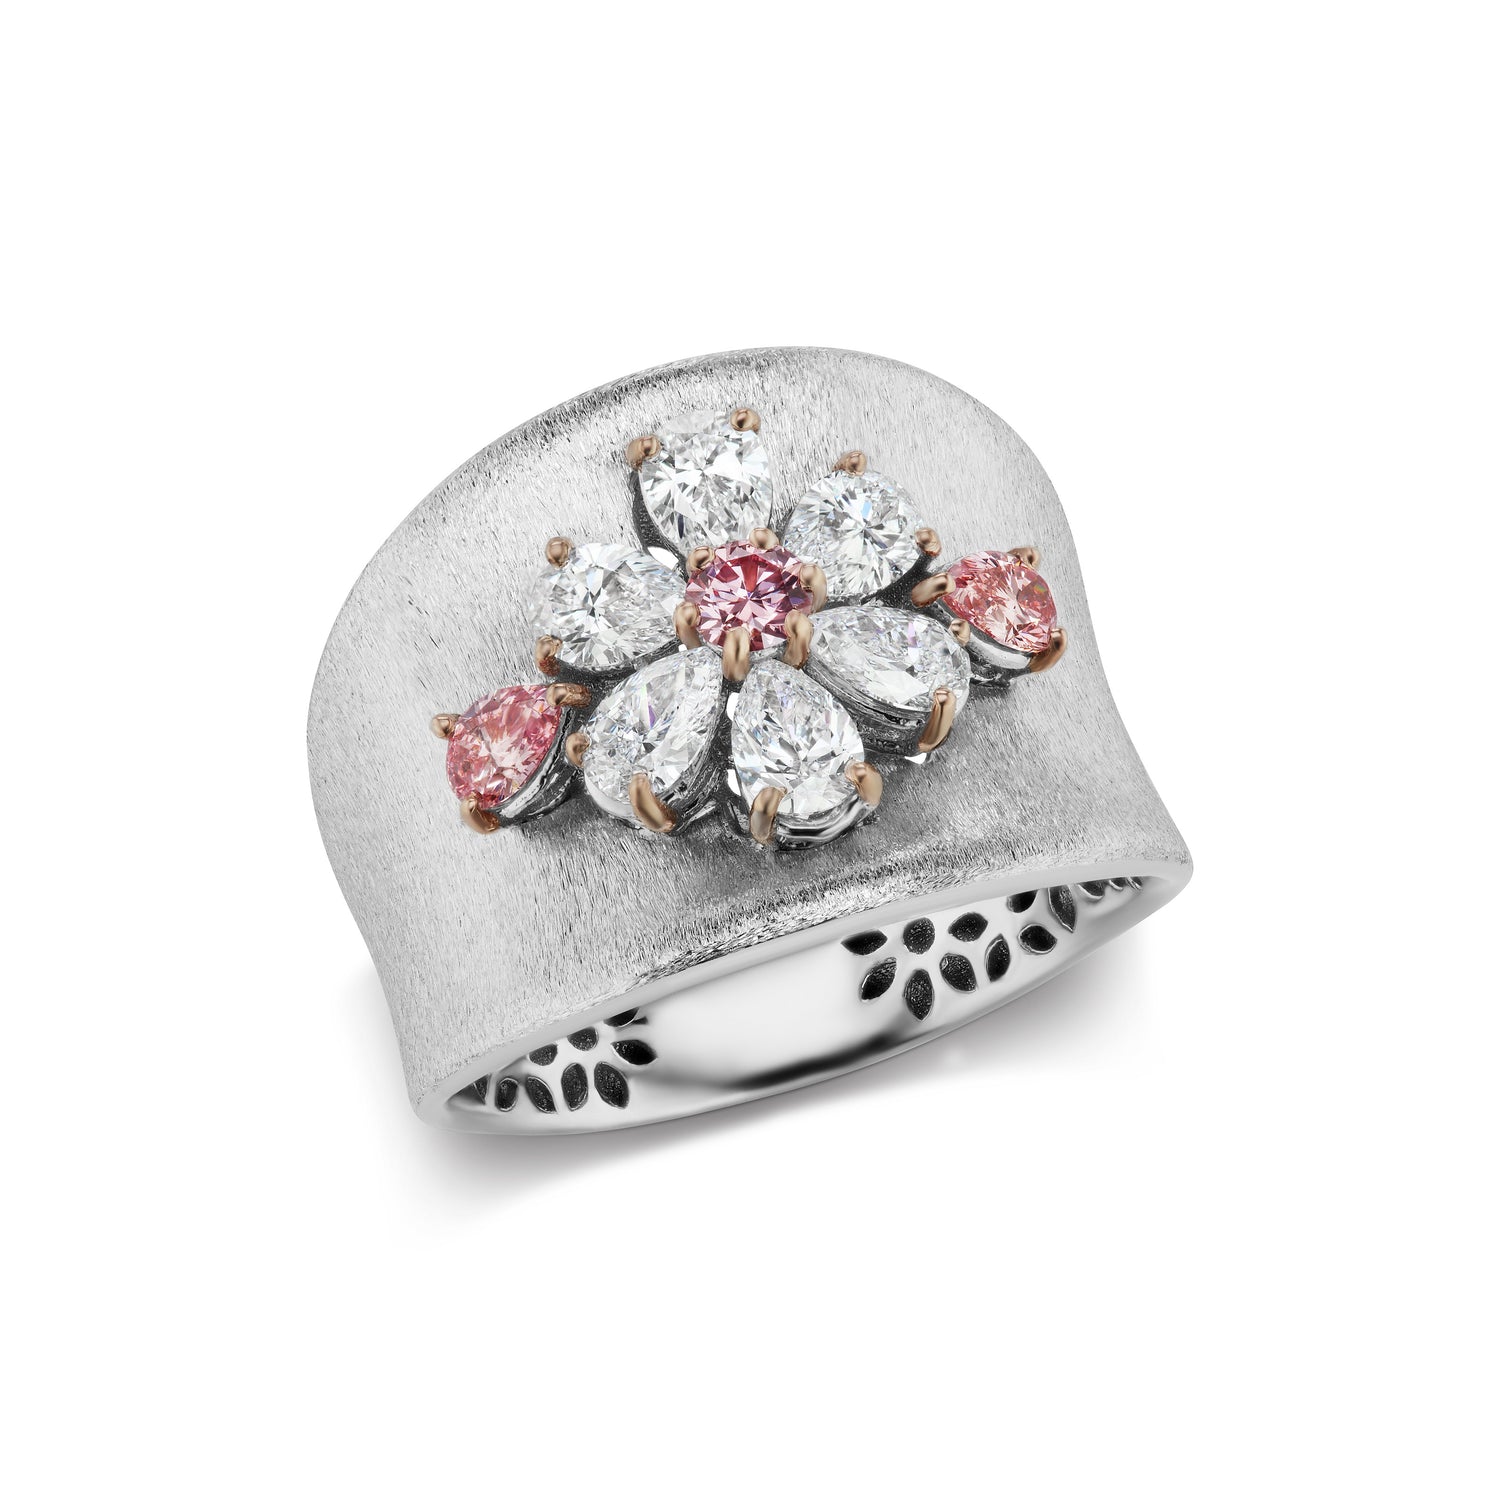 18K pink and white gold band with argyle pink and white diamonds forming a flower on the center of the ring 